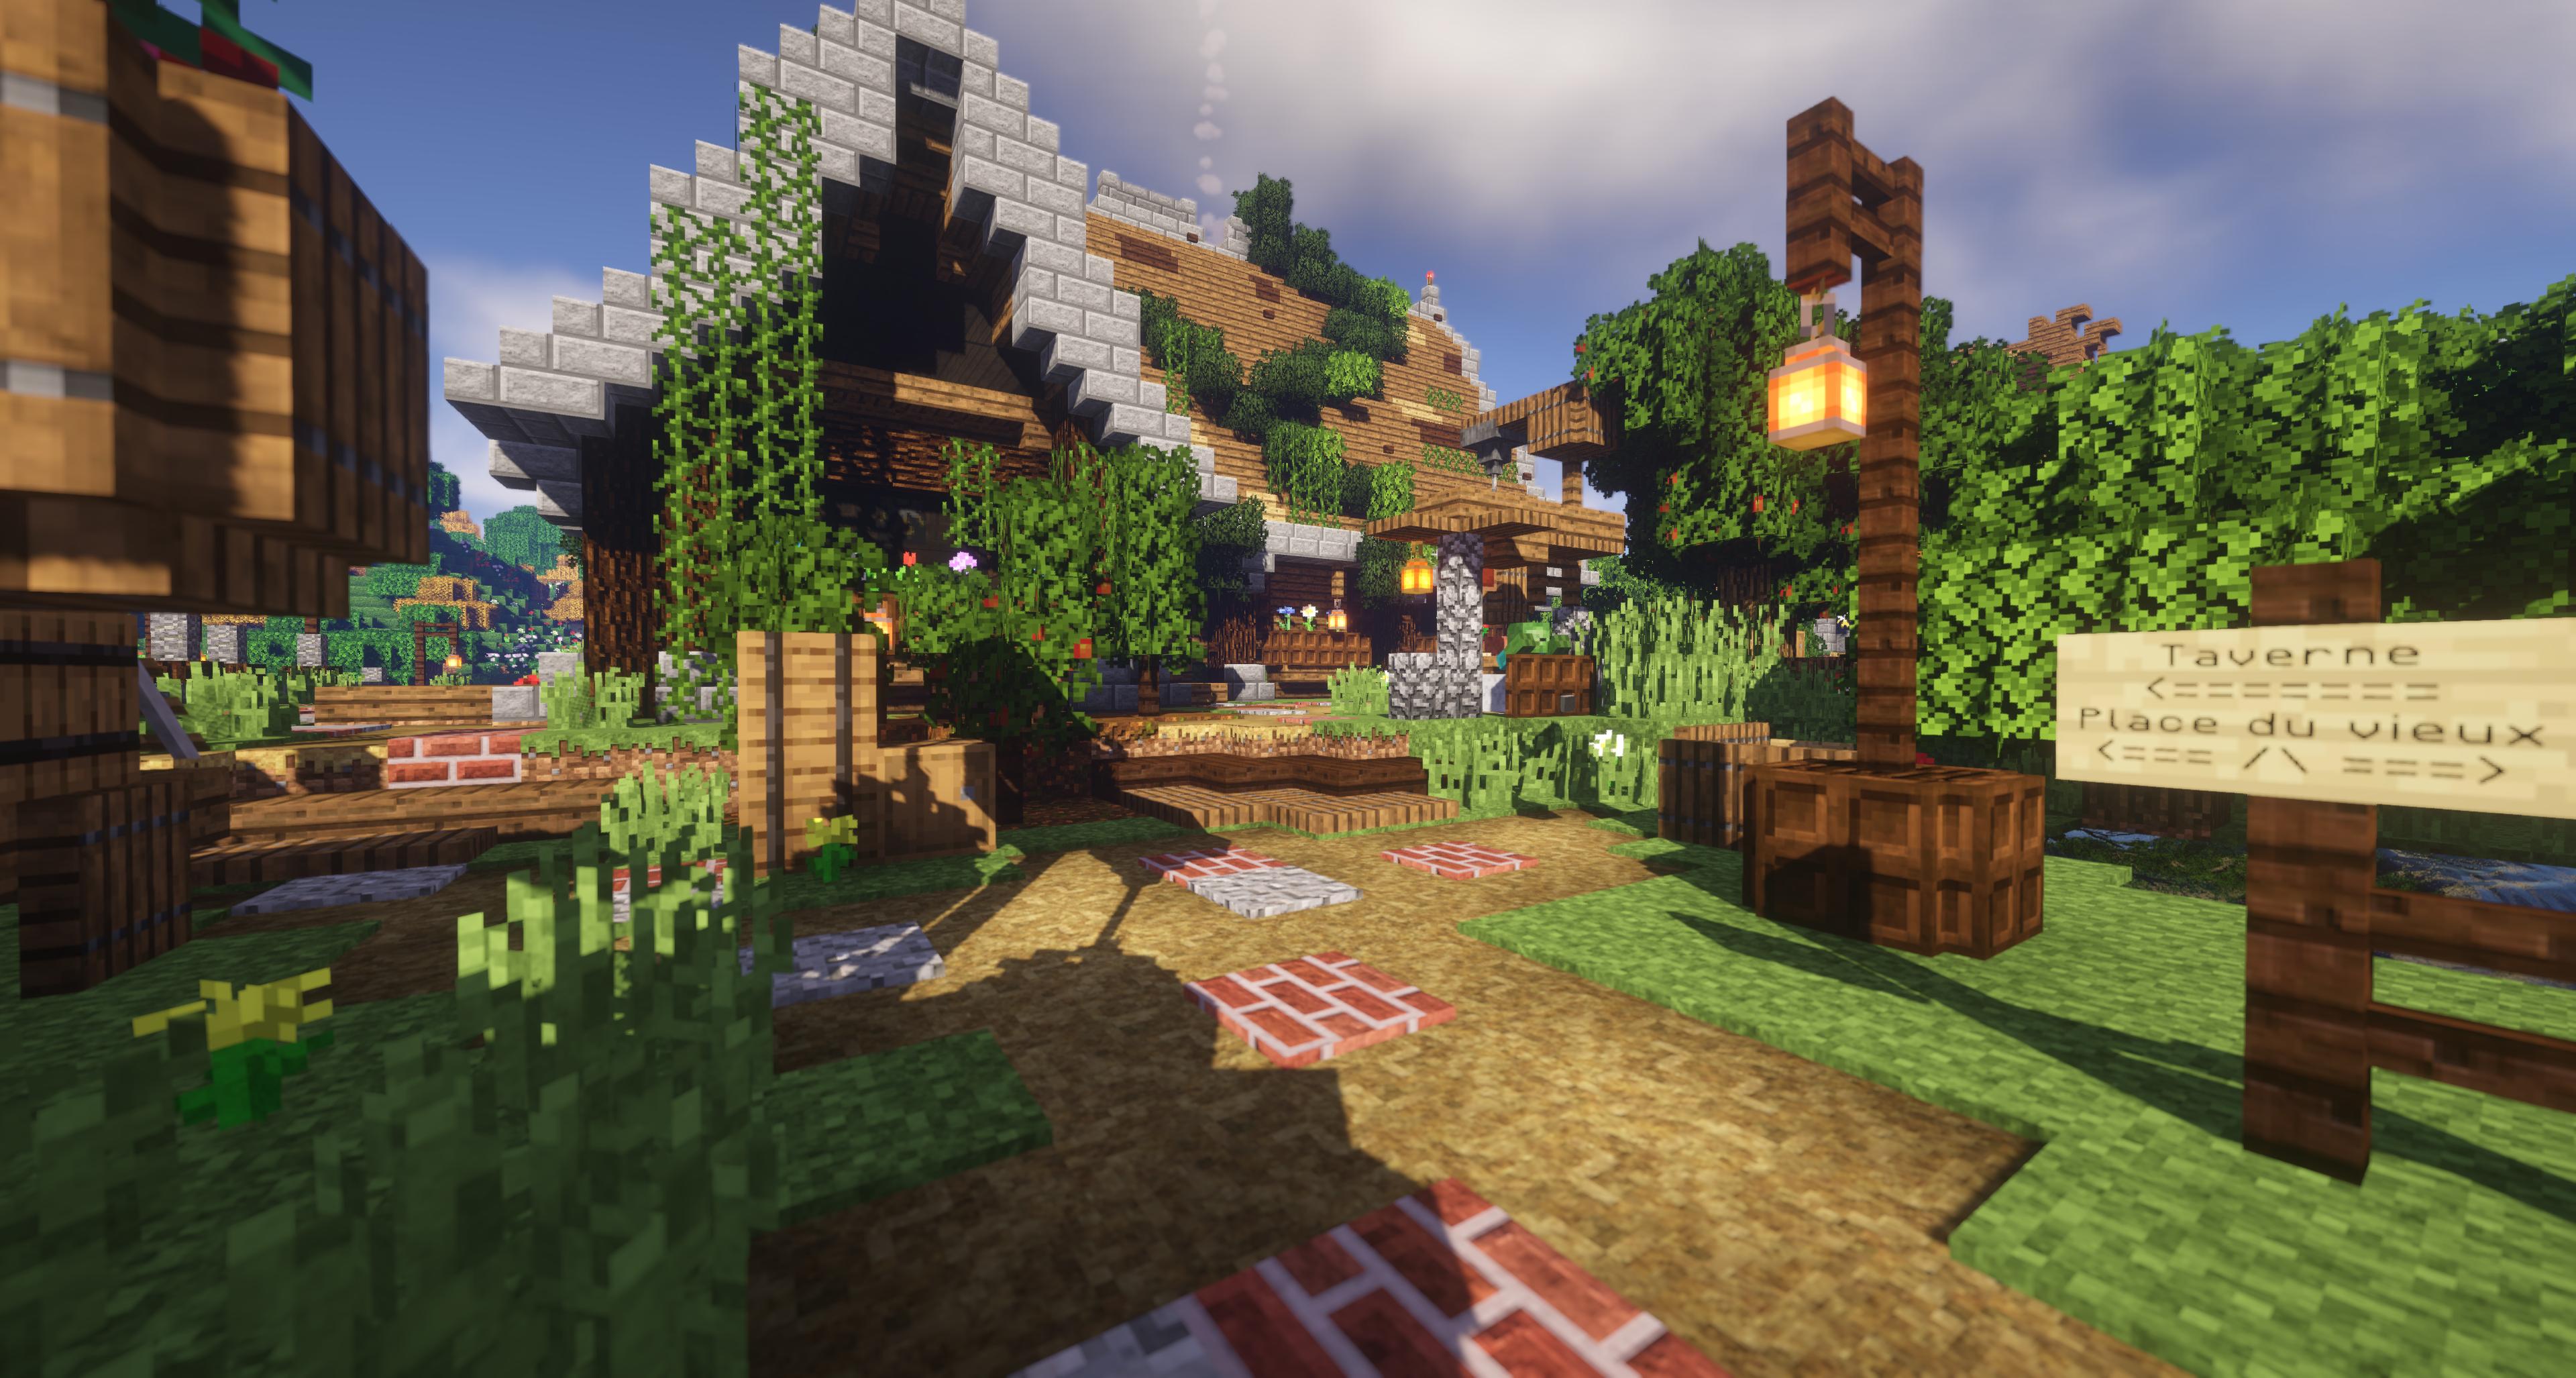 minecraft 1.12 shaders and forge